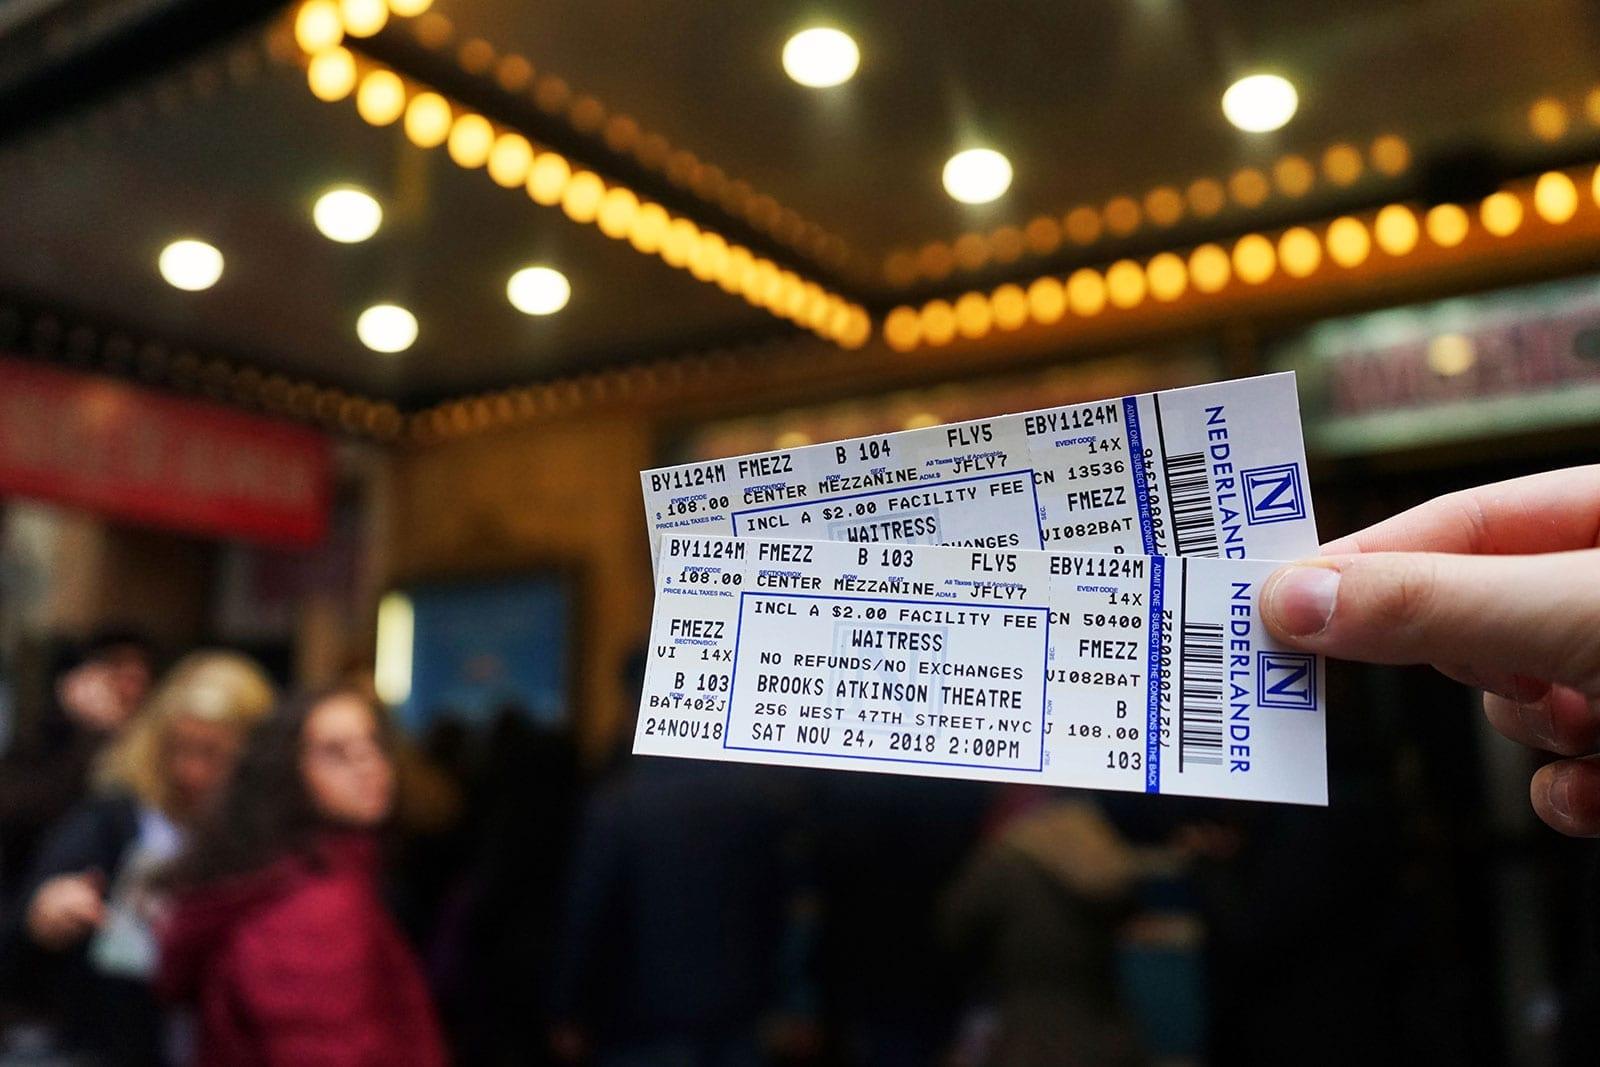 Broadway tickets for tonight